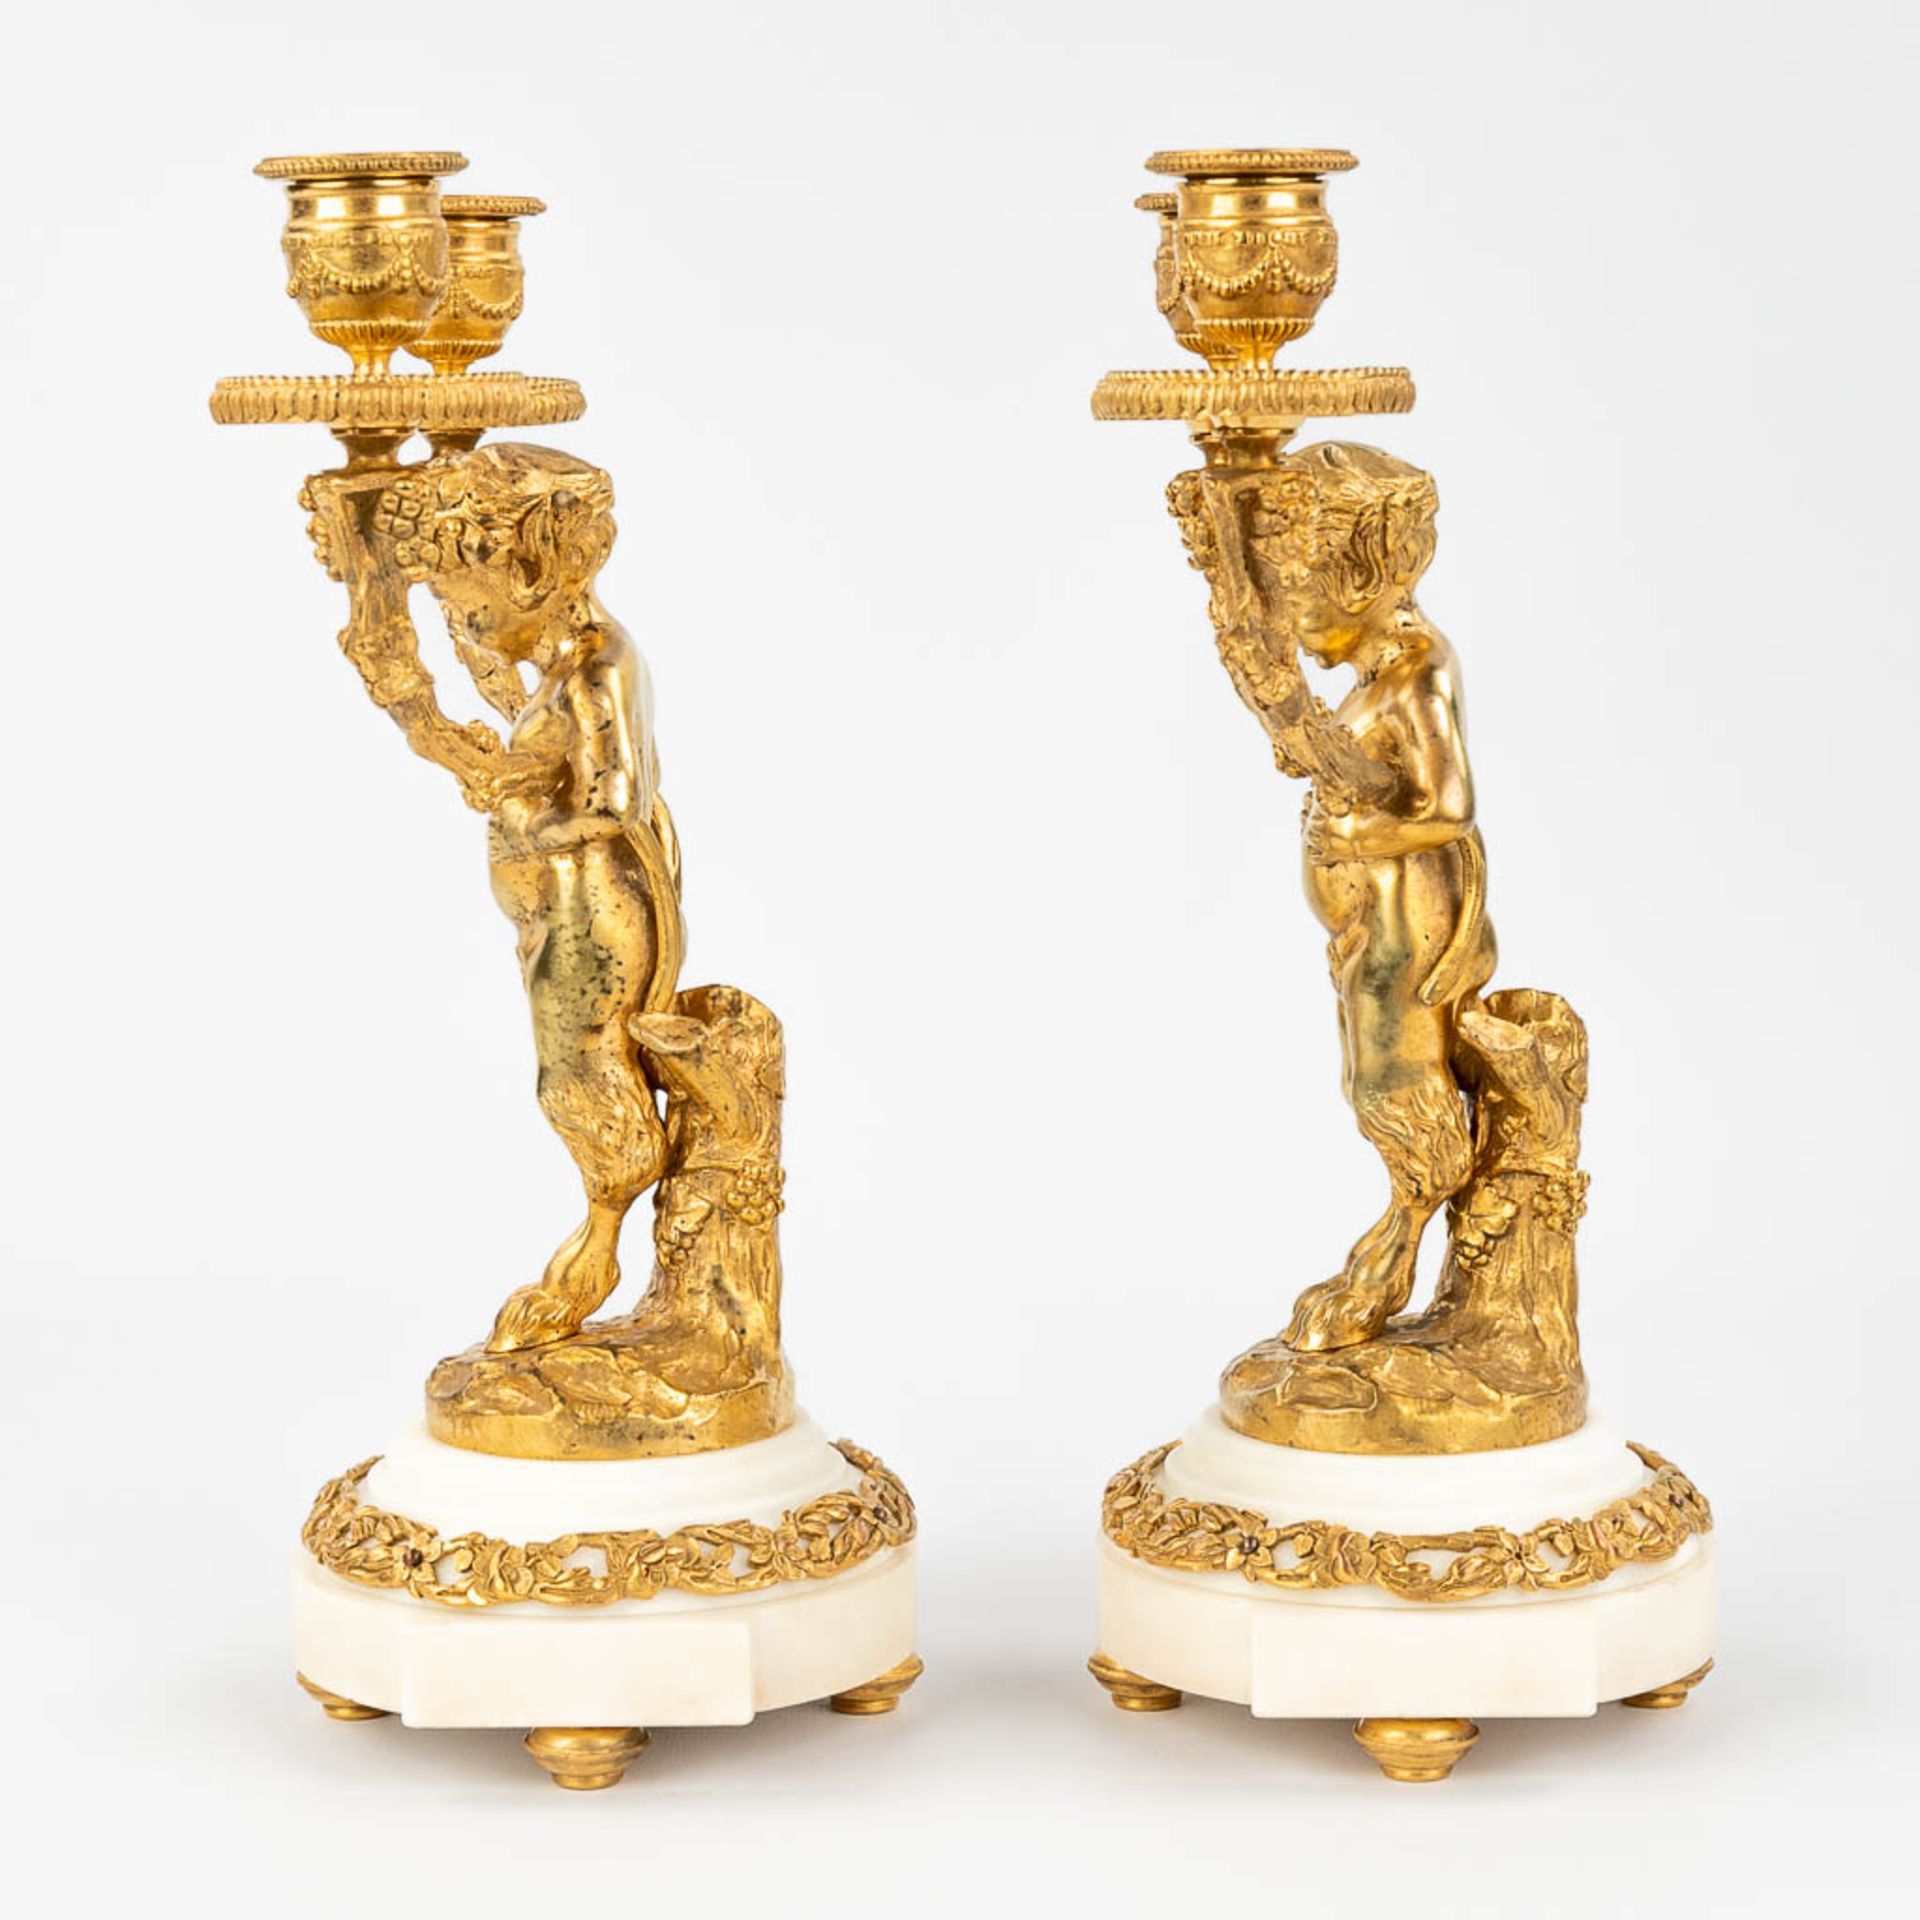 A pair of candelabra with Satyr figurines, made of gold-plated bronze. (13 x 21 x 30,5cm) - Bild 5 aus 13